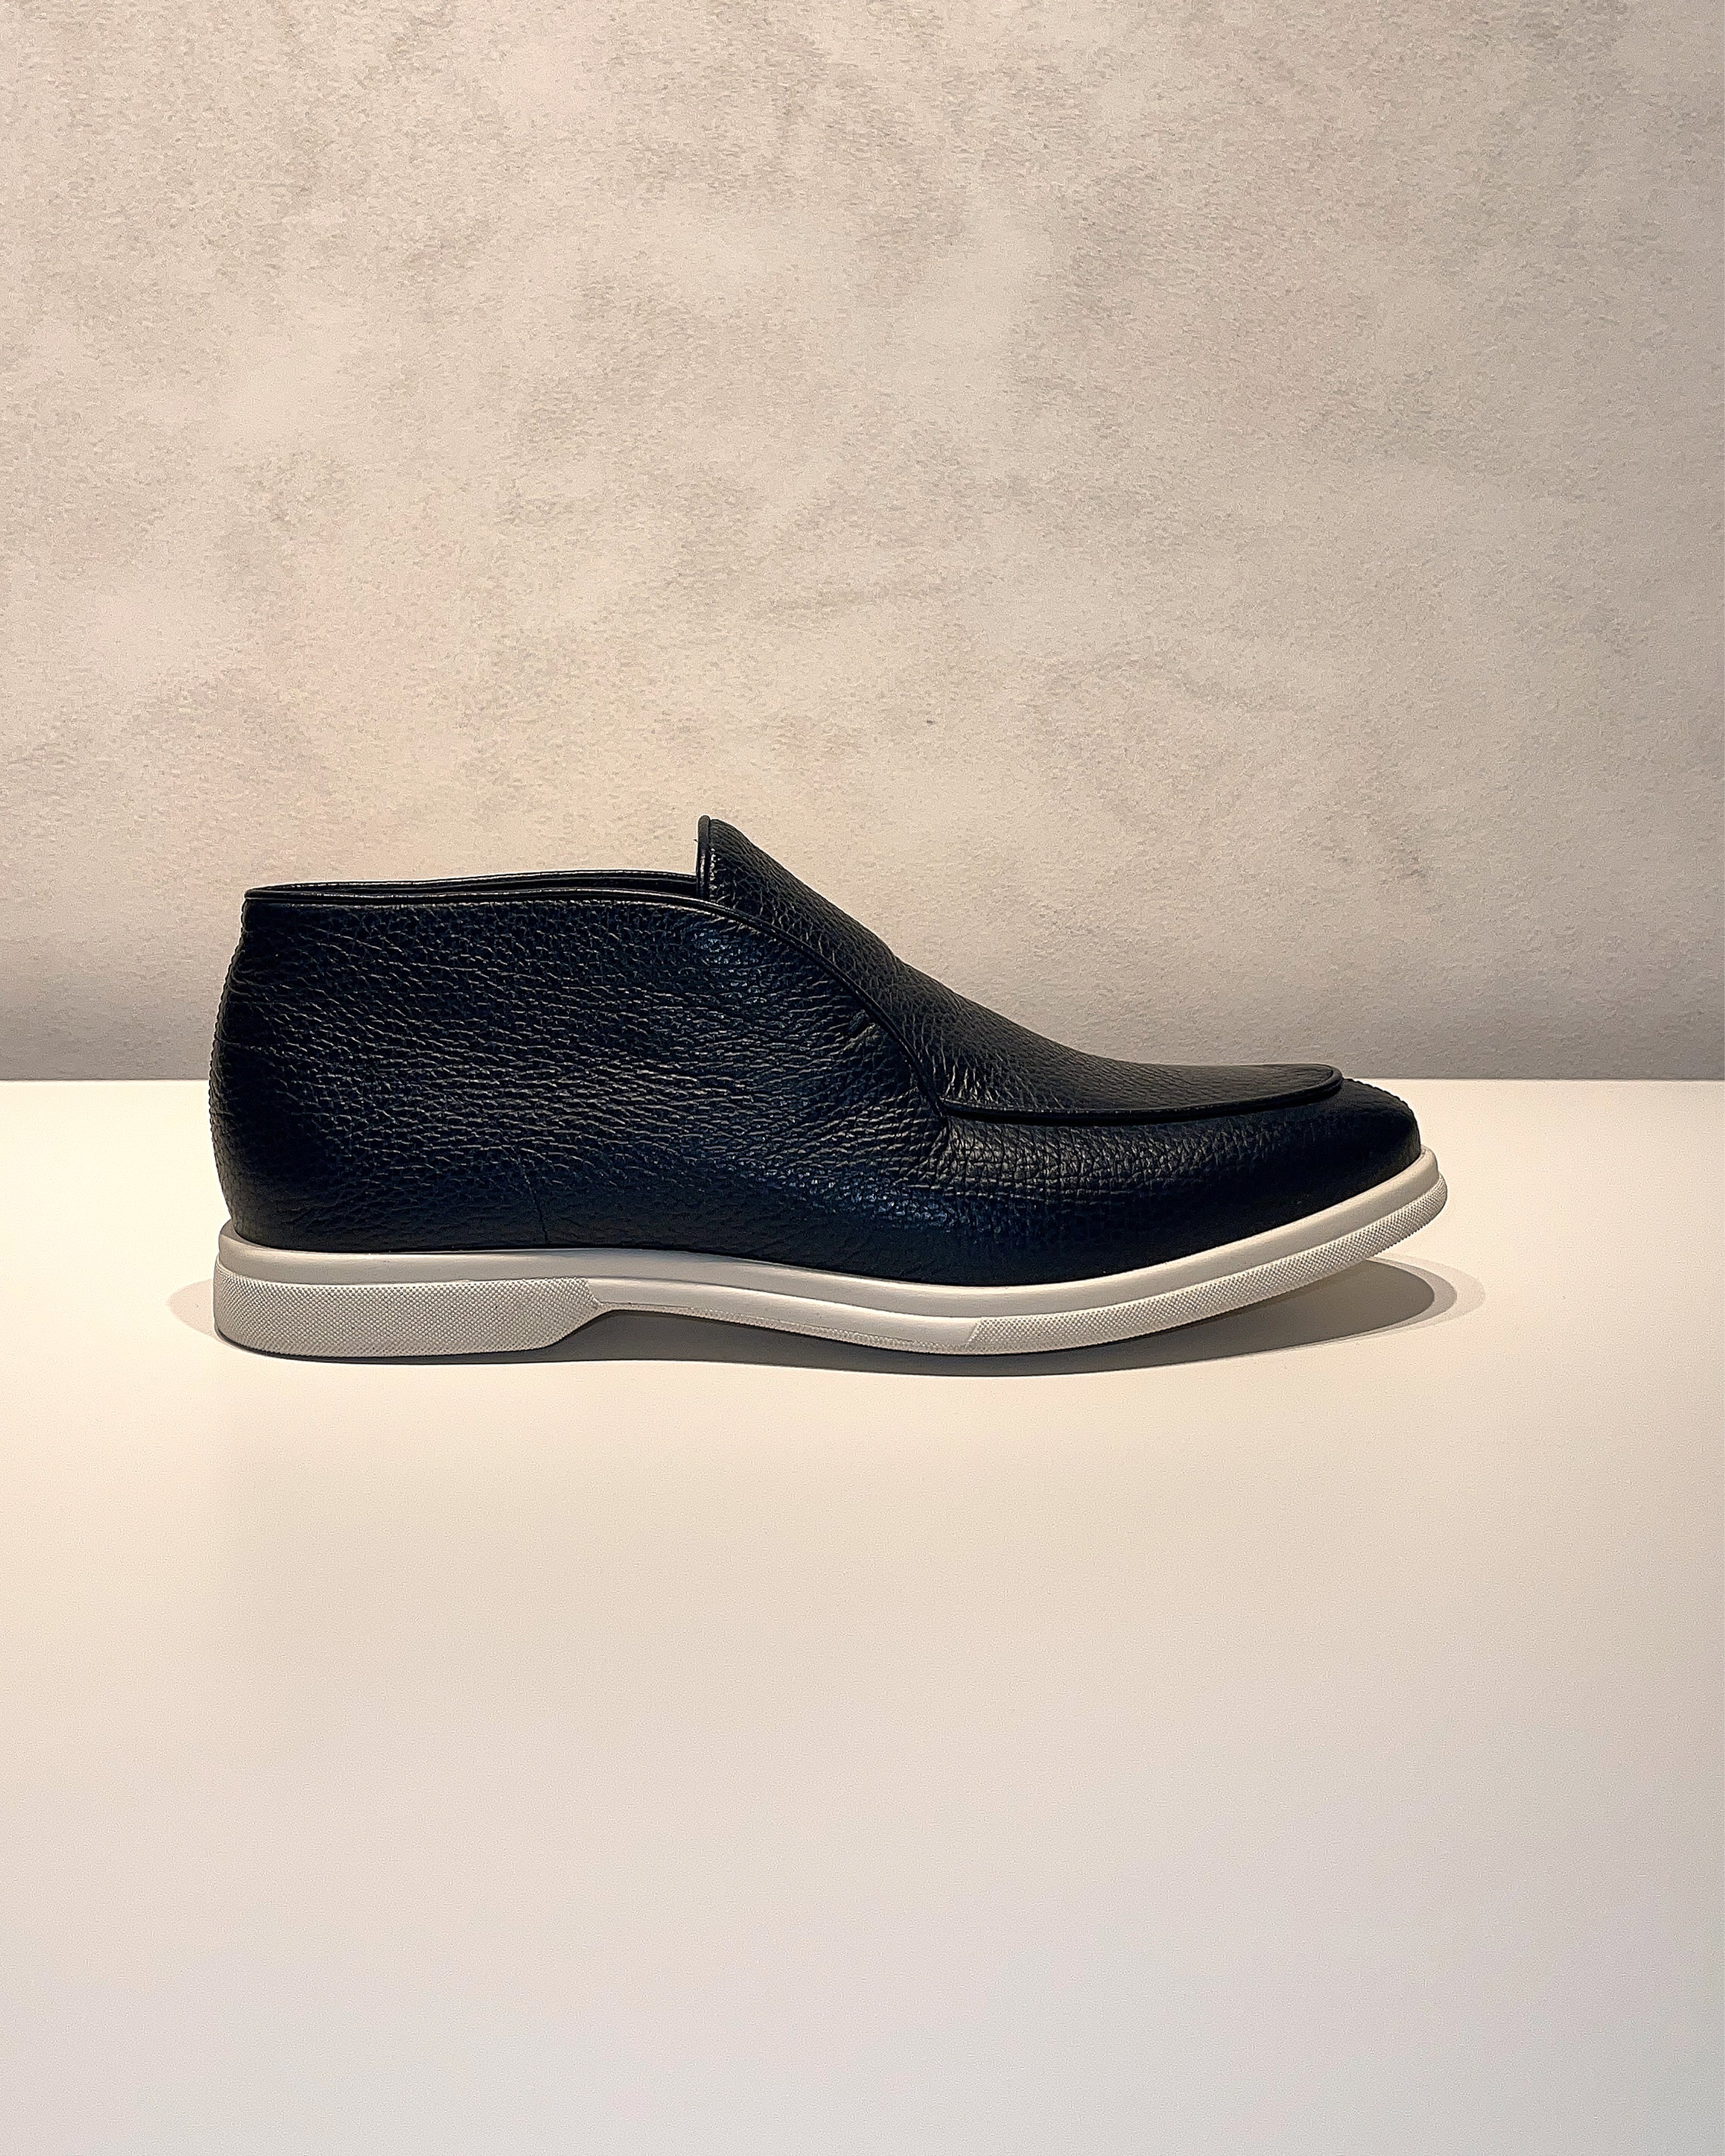 Sophisticated Italian Loafers Navy Blue Grained Calf